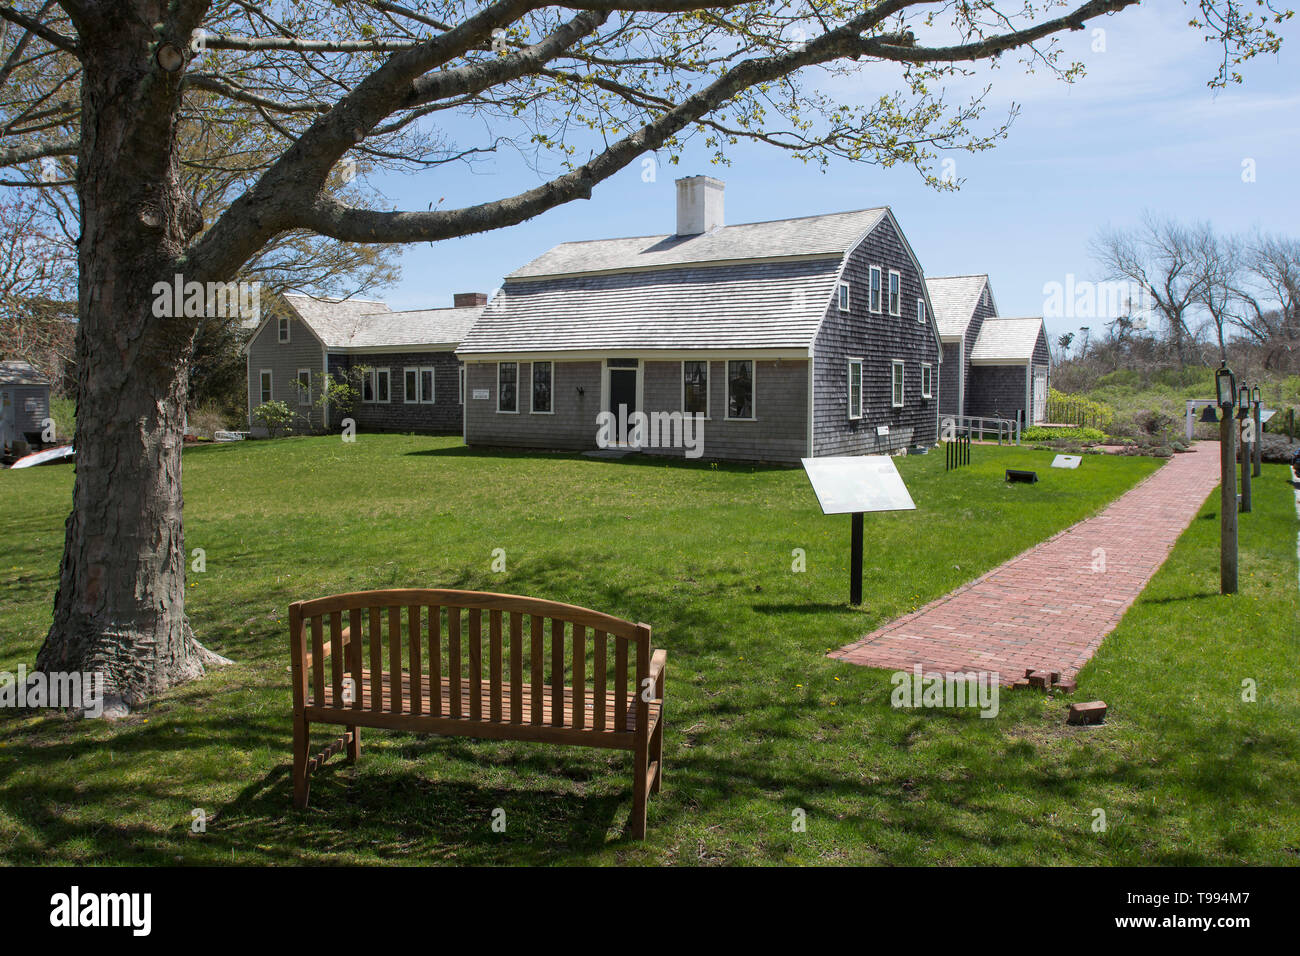 The historic Joseph Atwood (1720 - 1795) house (1752). The oldest house, now a museum in Chatham, Massachusetts on Cape Cod Stock Photo